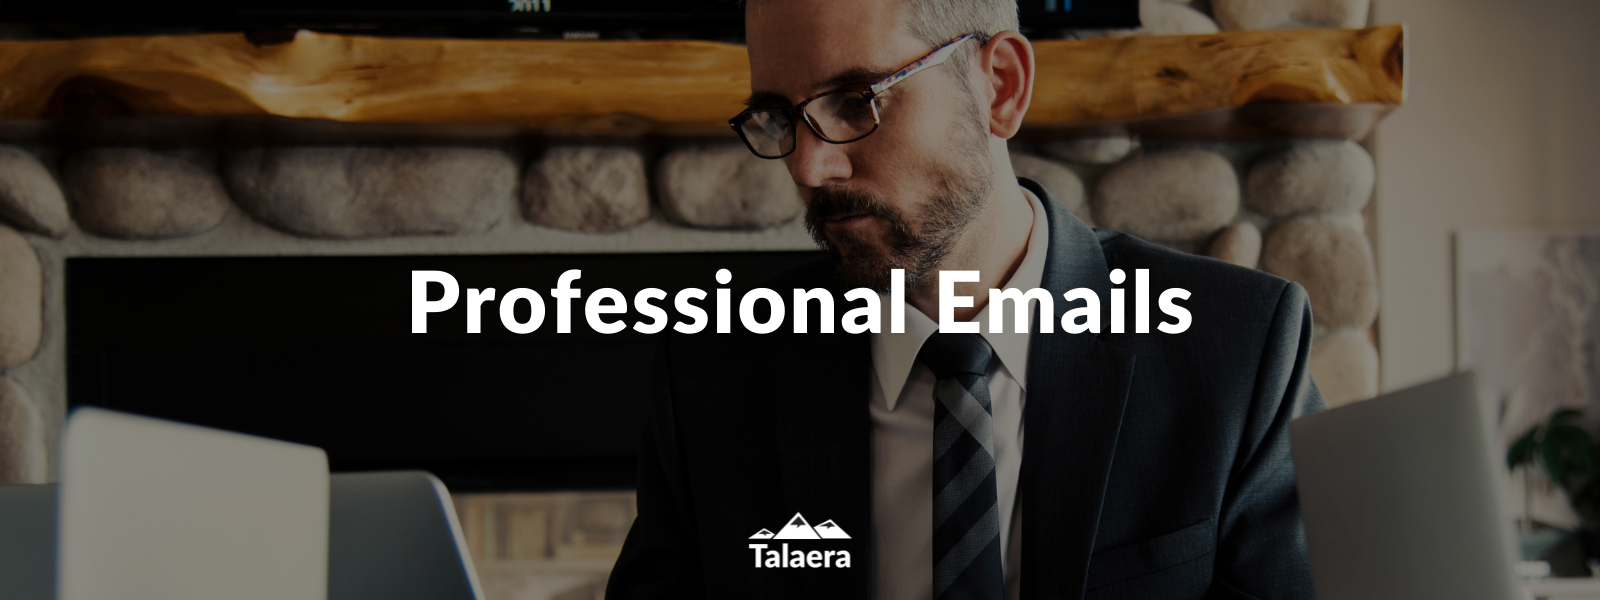 Tips for Writing Professional Emails in English - Talaera business English